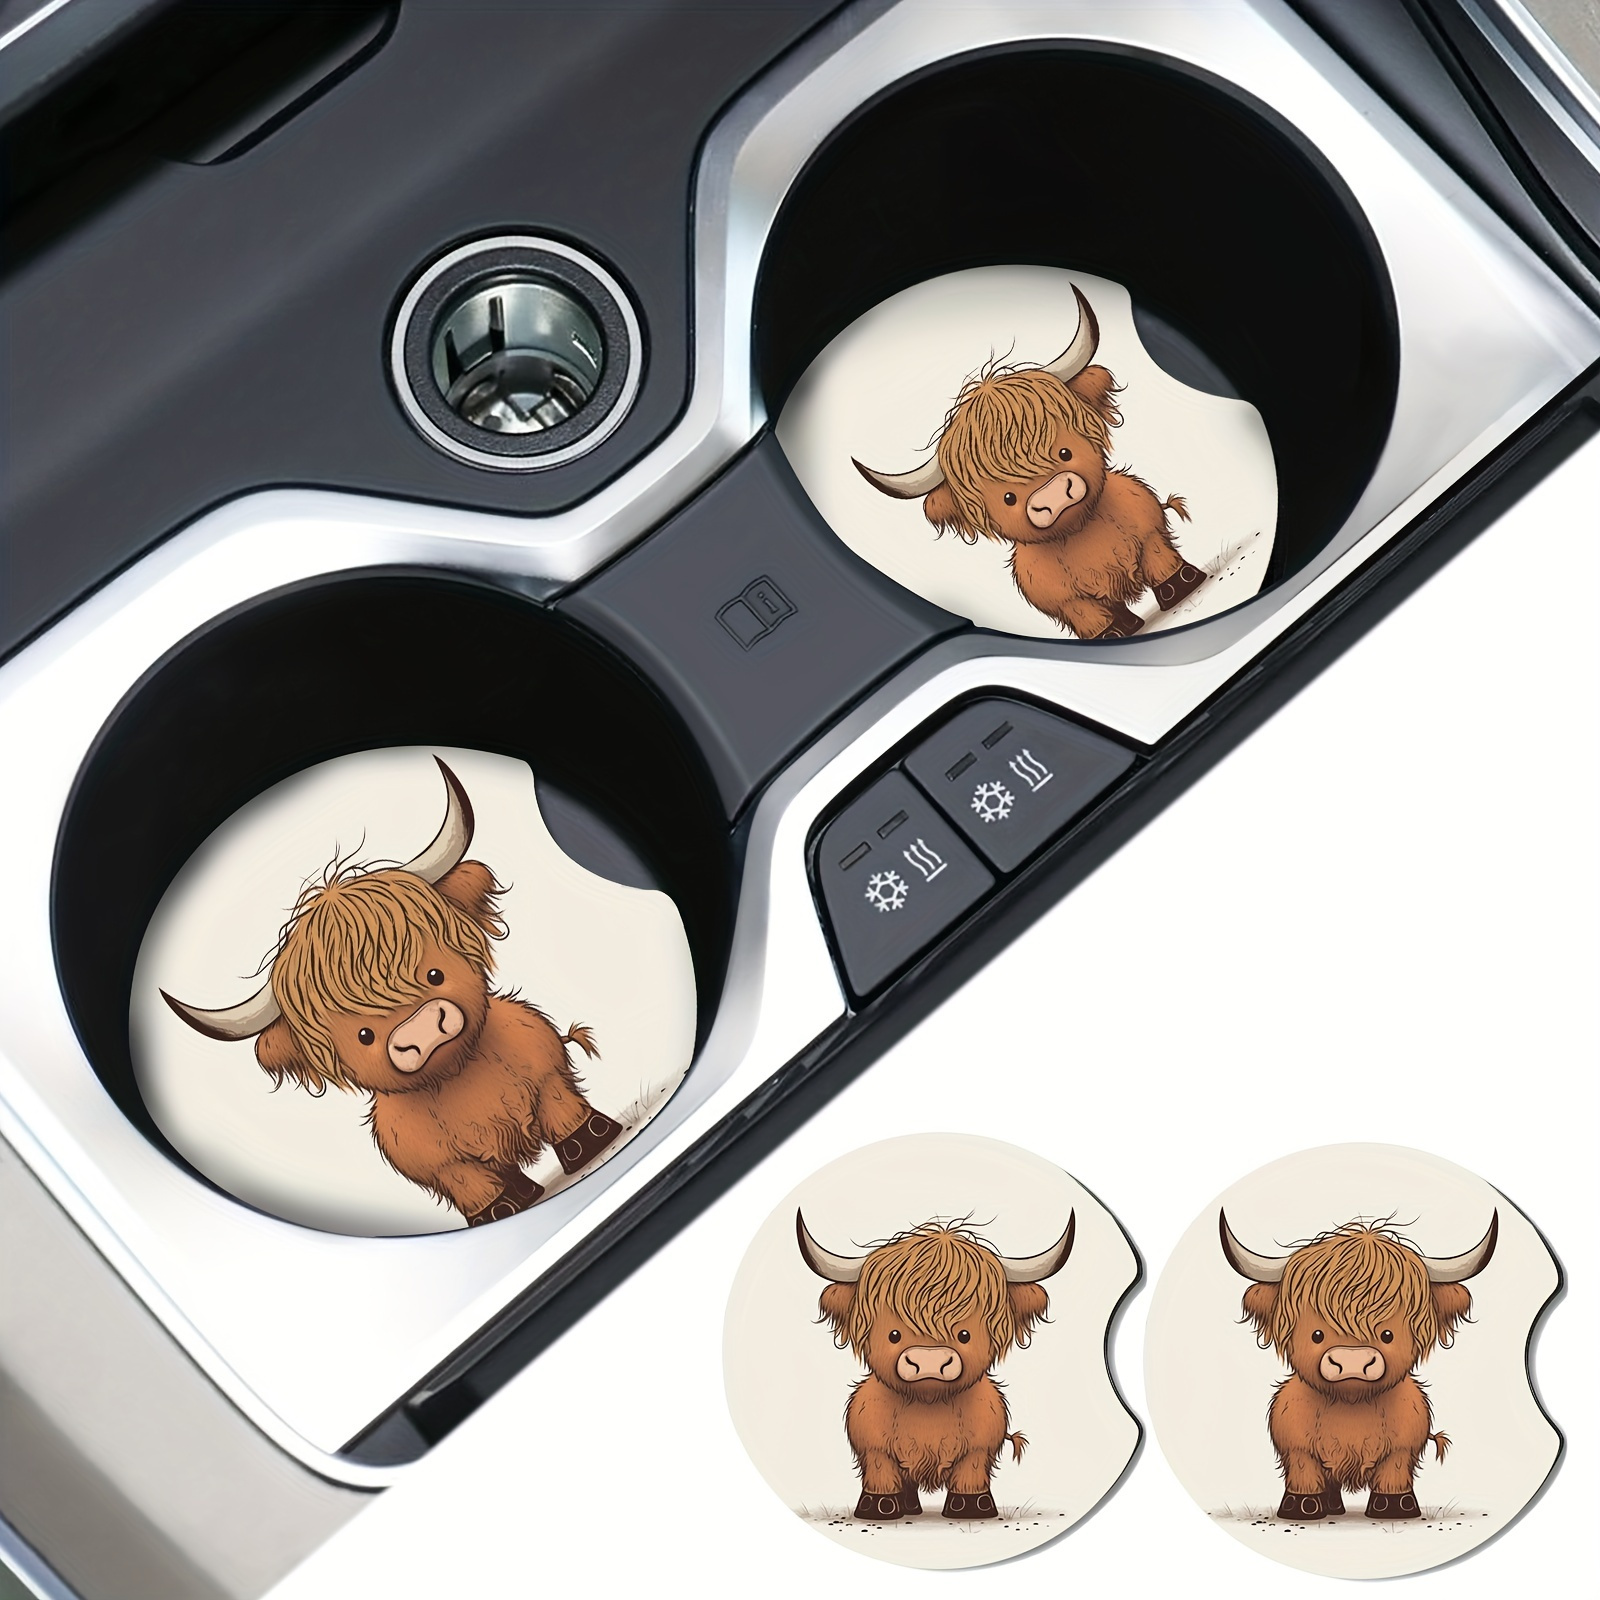 

2pcs Absorbent Auto Drink Coasters Mats Vehicle Car Coaster For Interior Accessories Fashion Holders Insert Car Cup Accessories Women